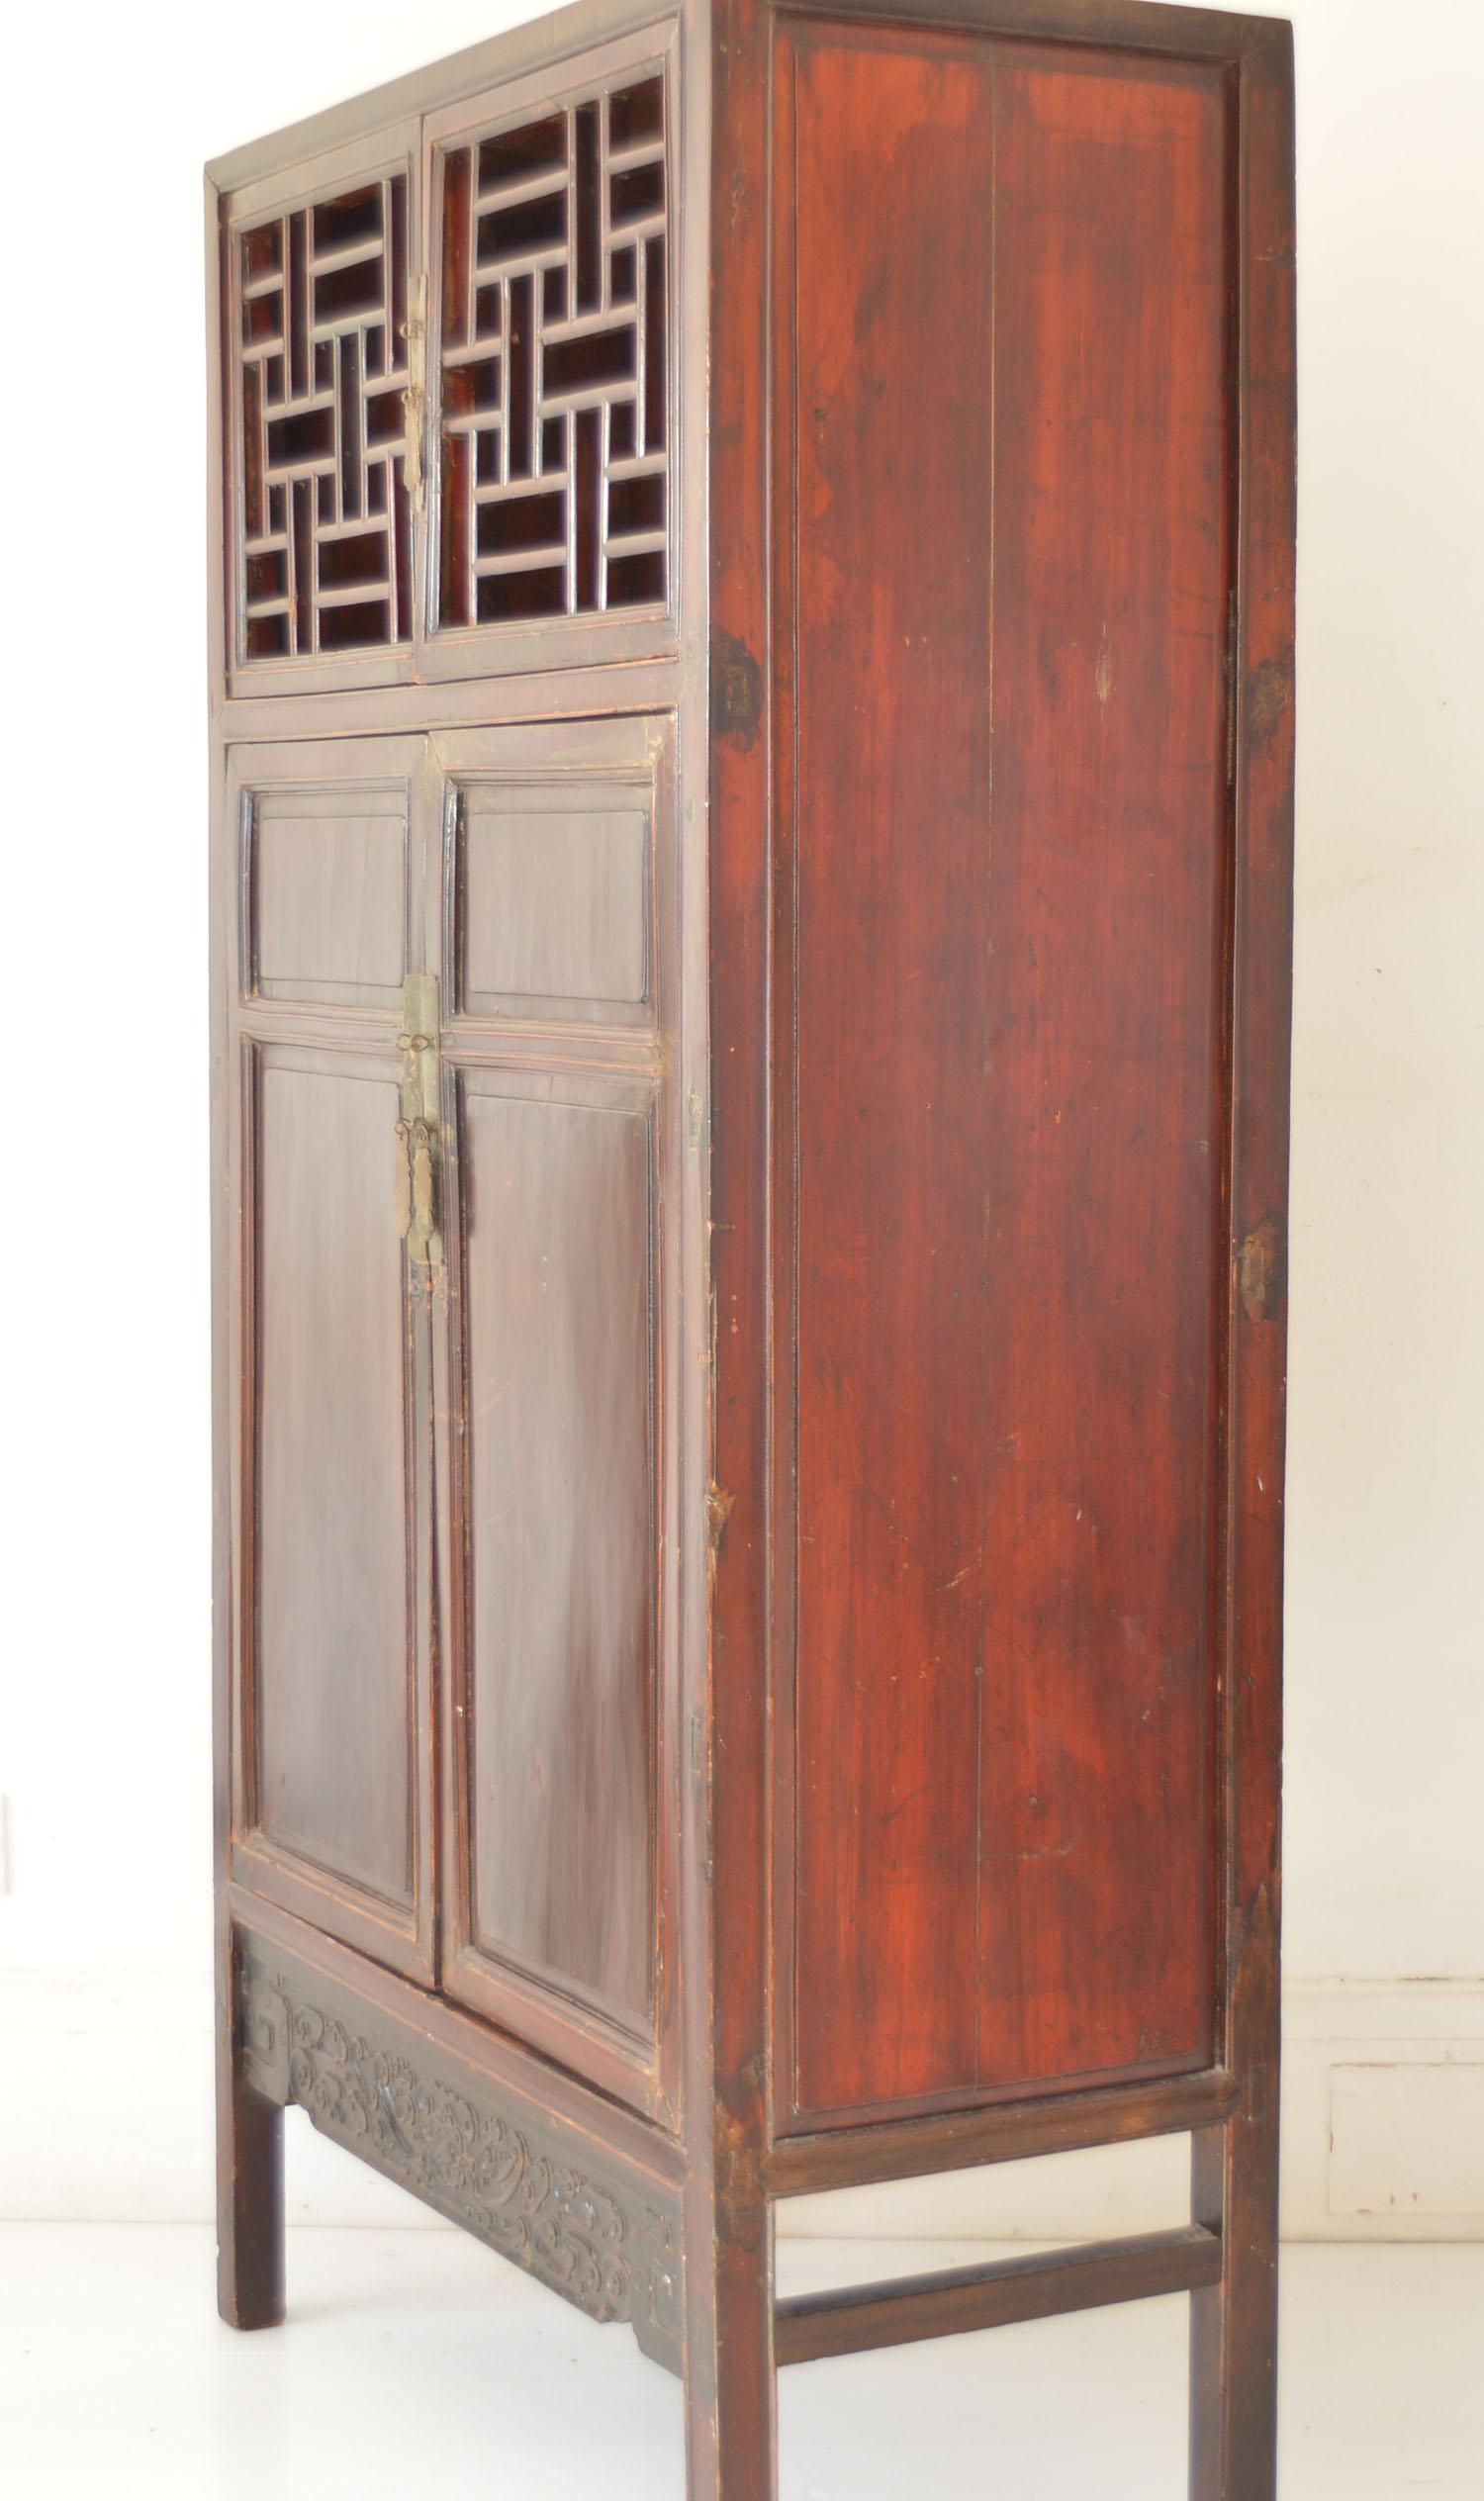 Chinoiserie Antique Chinese Lacquered Cabinet with Lattice Work Doors, 19th Century